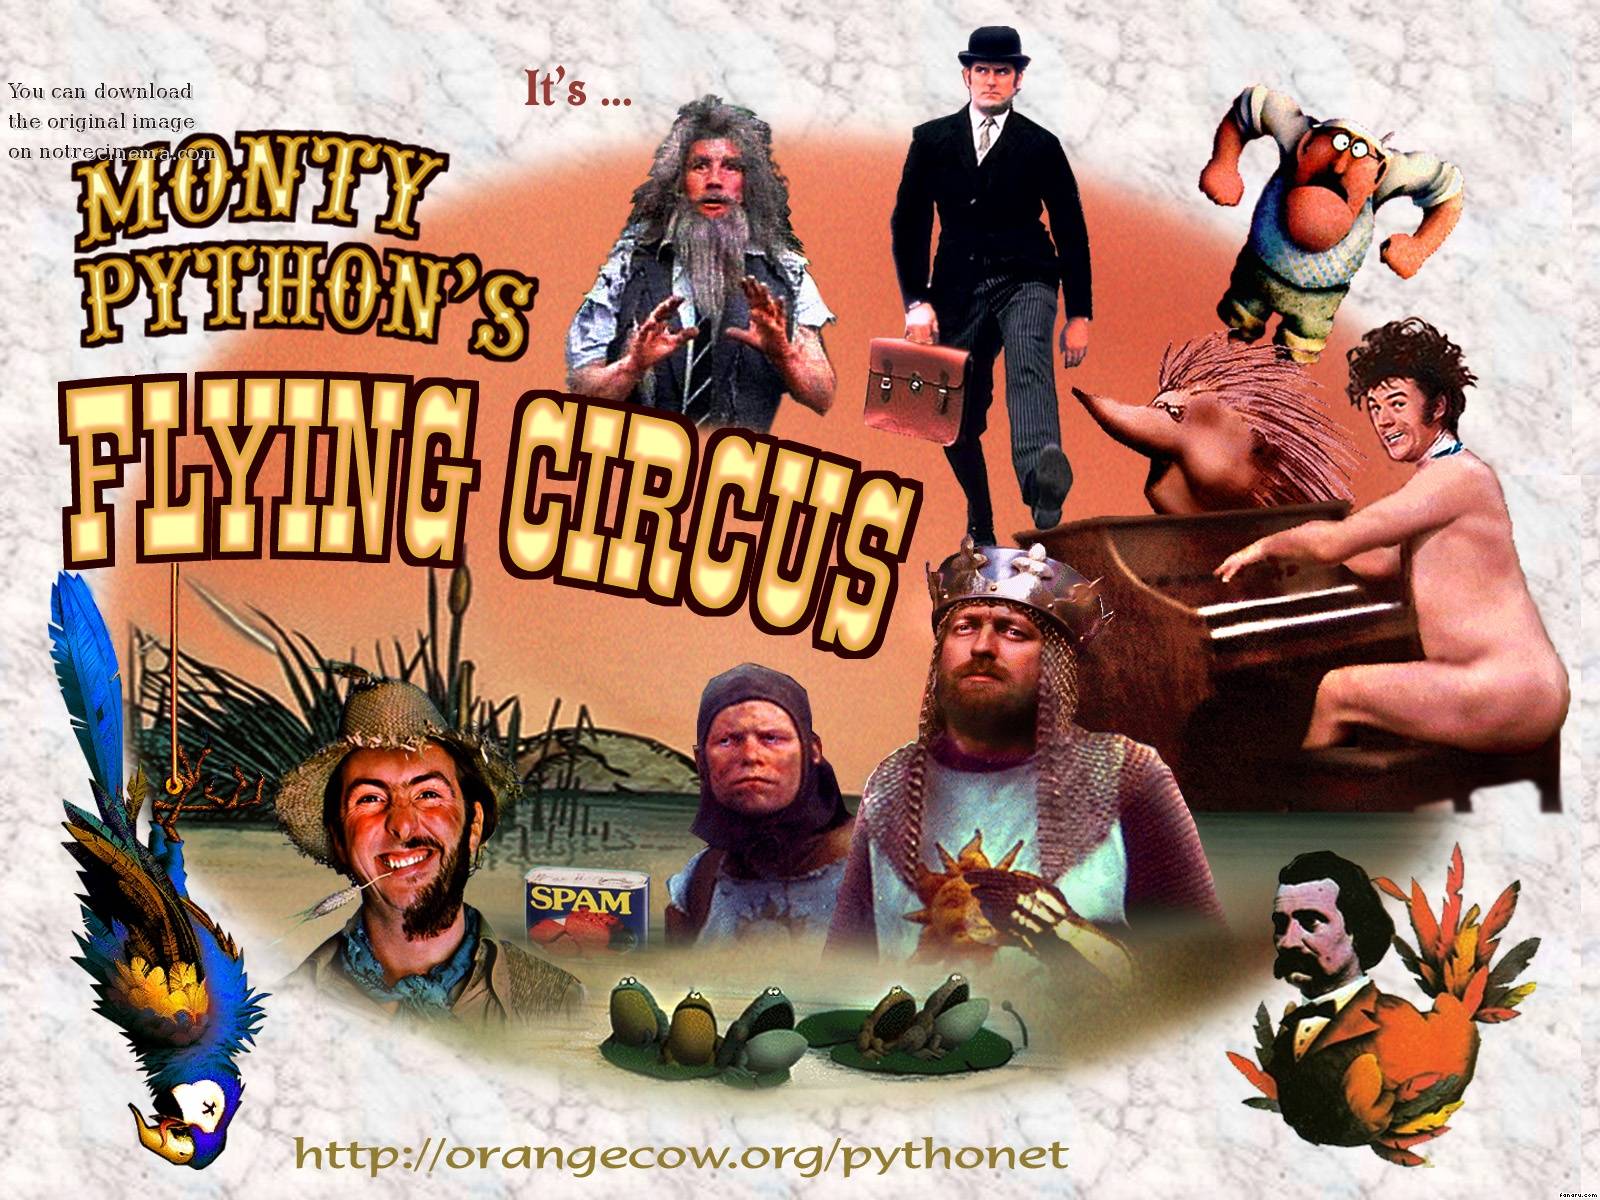 Monty Python Flying Circus Quotes. QuotesGram